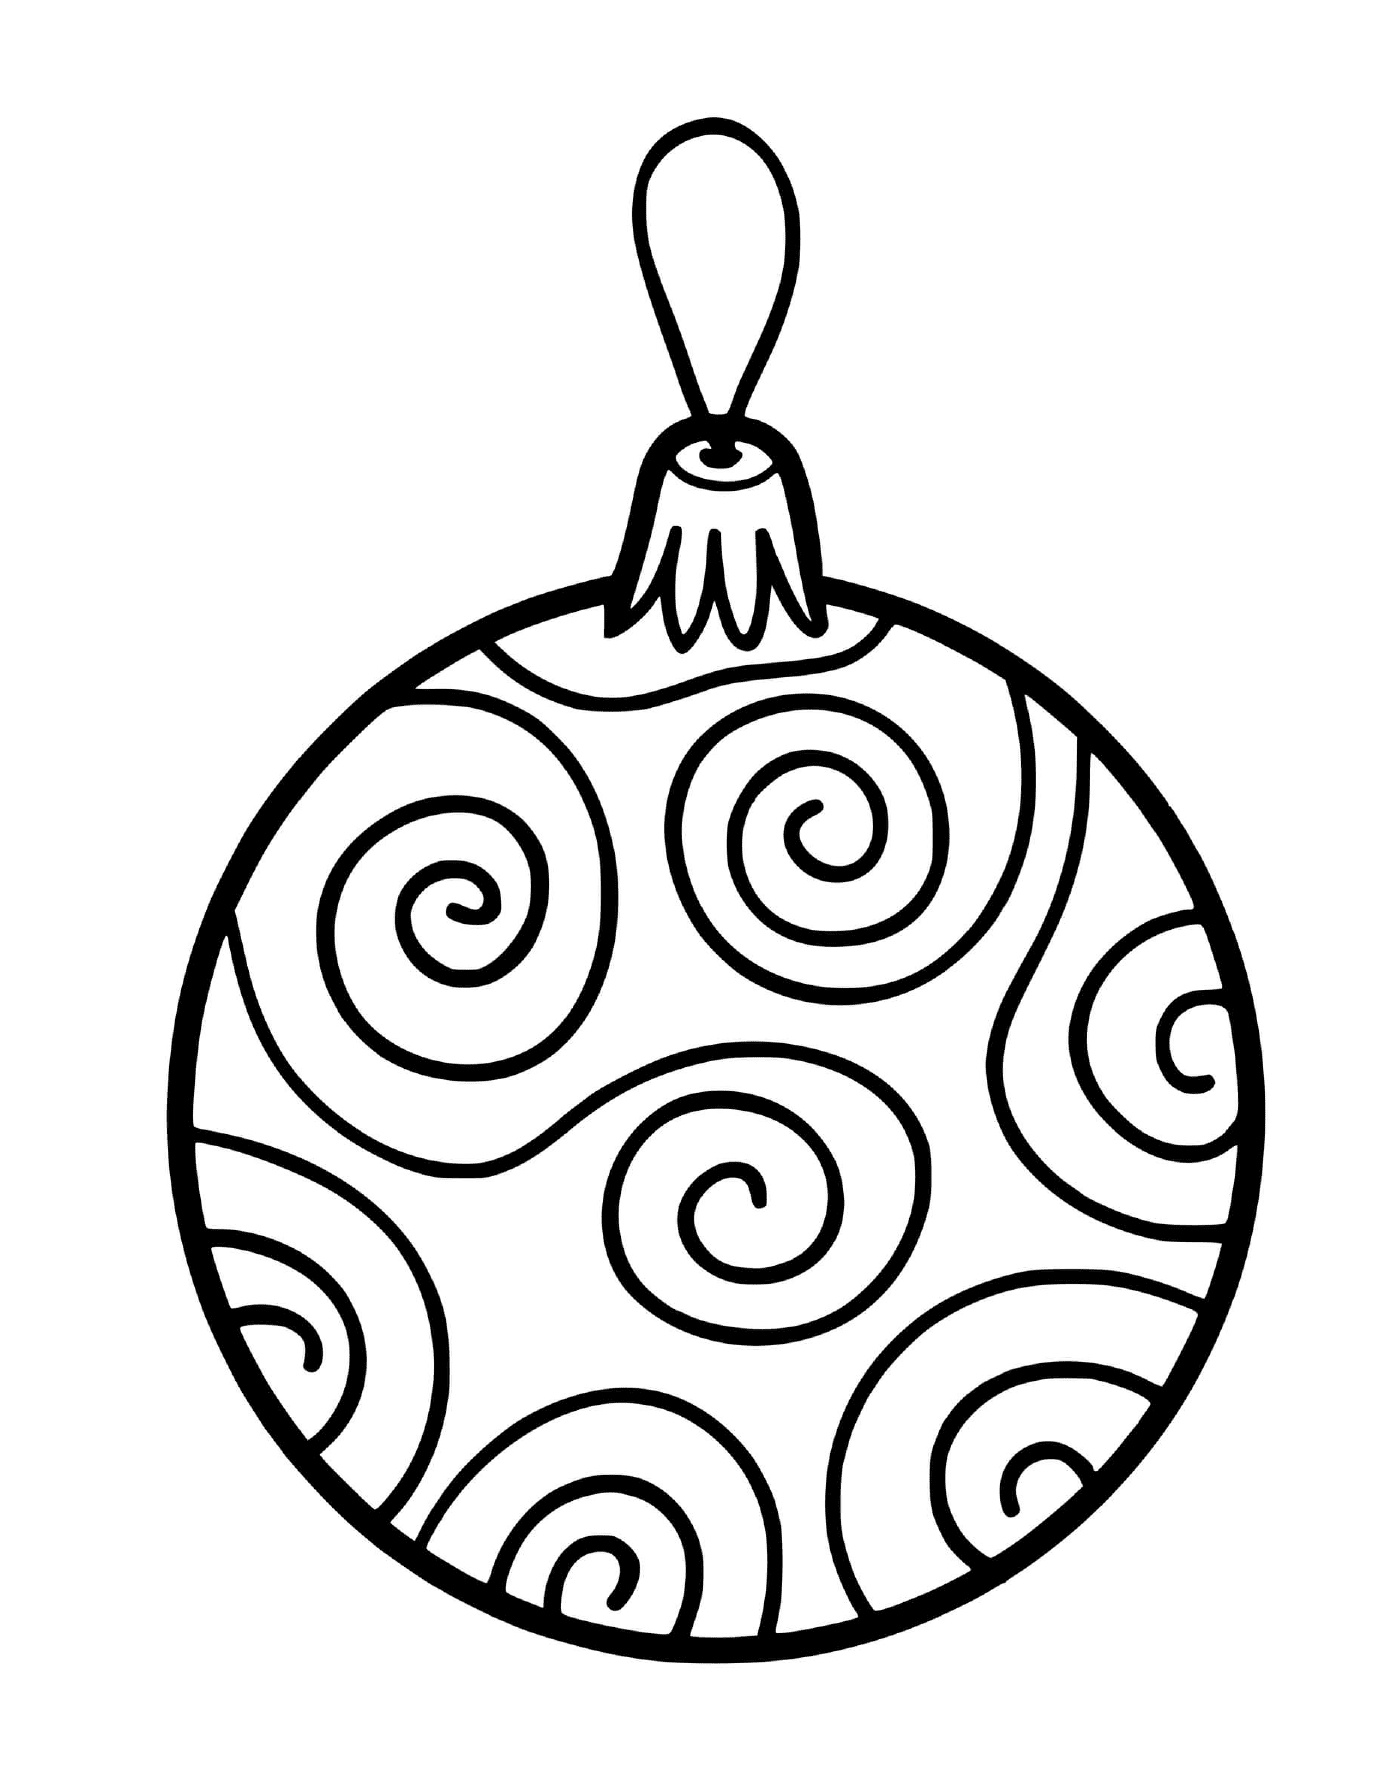  A Christmas tree ball with zigzags 